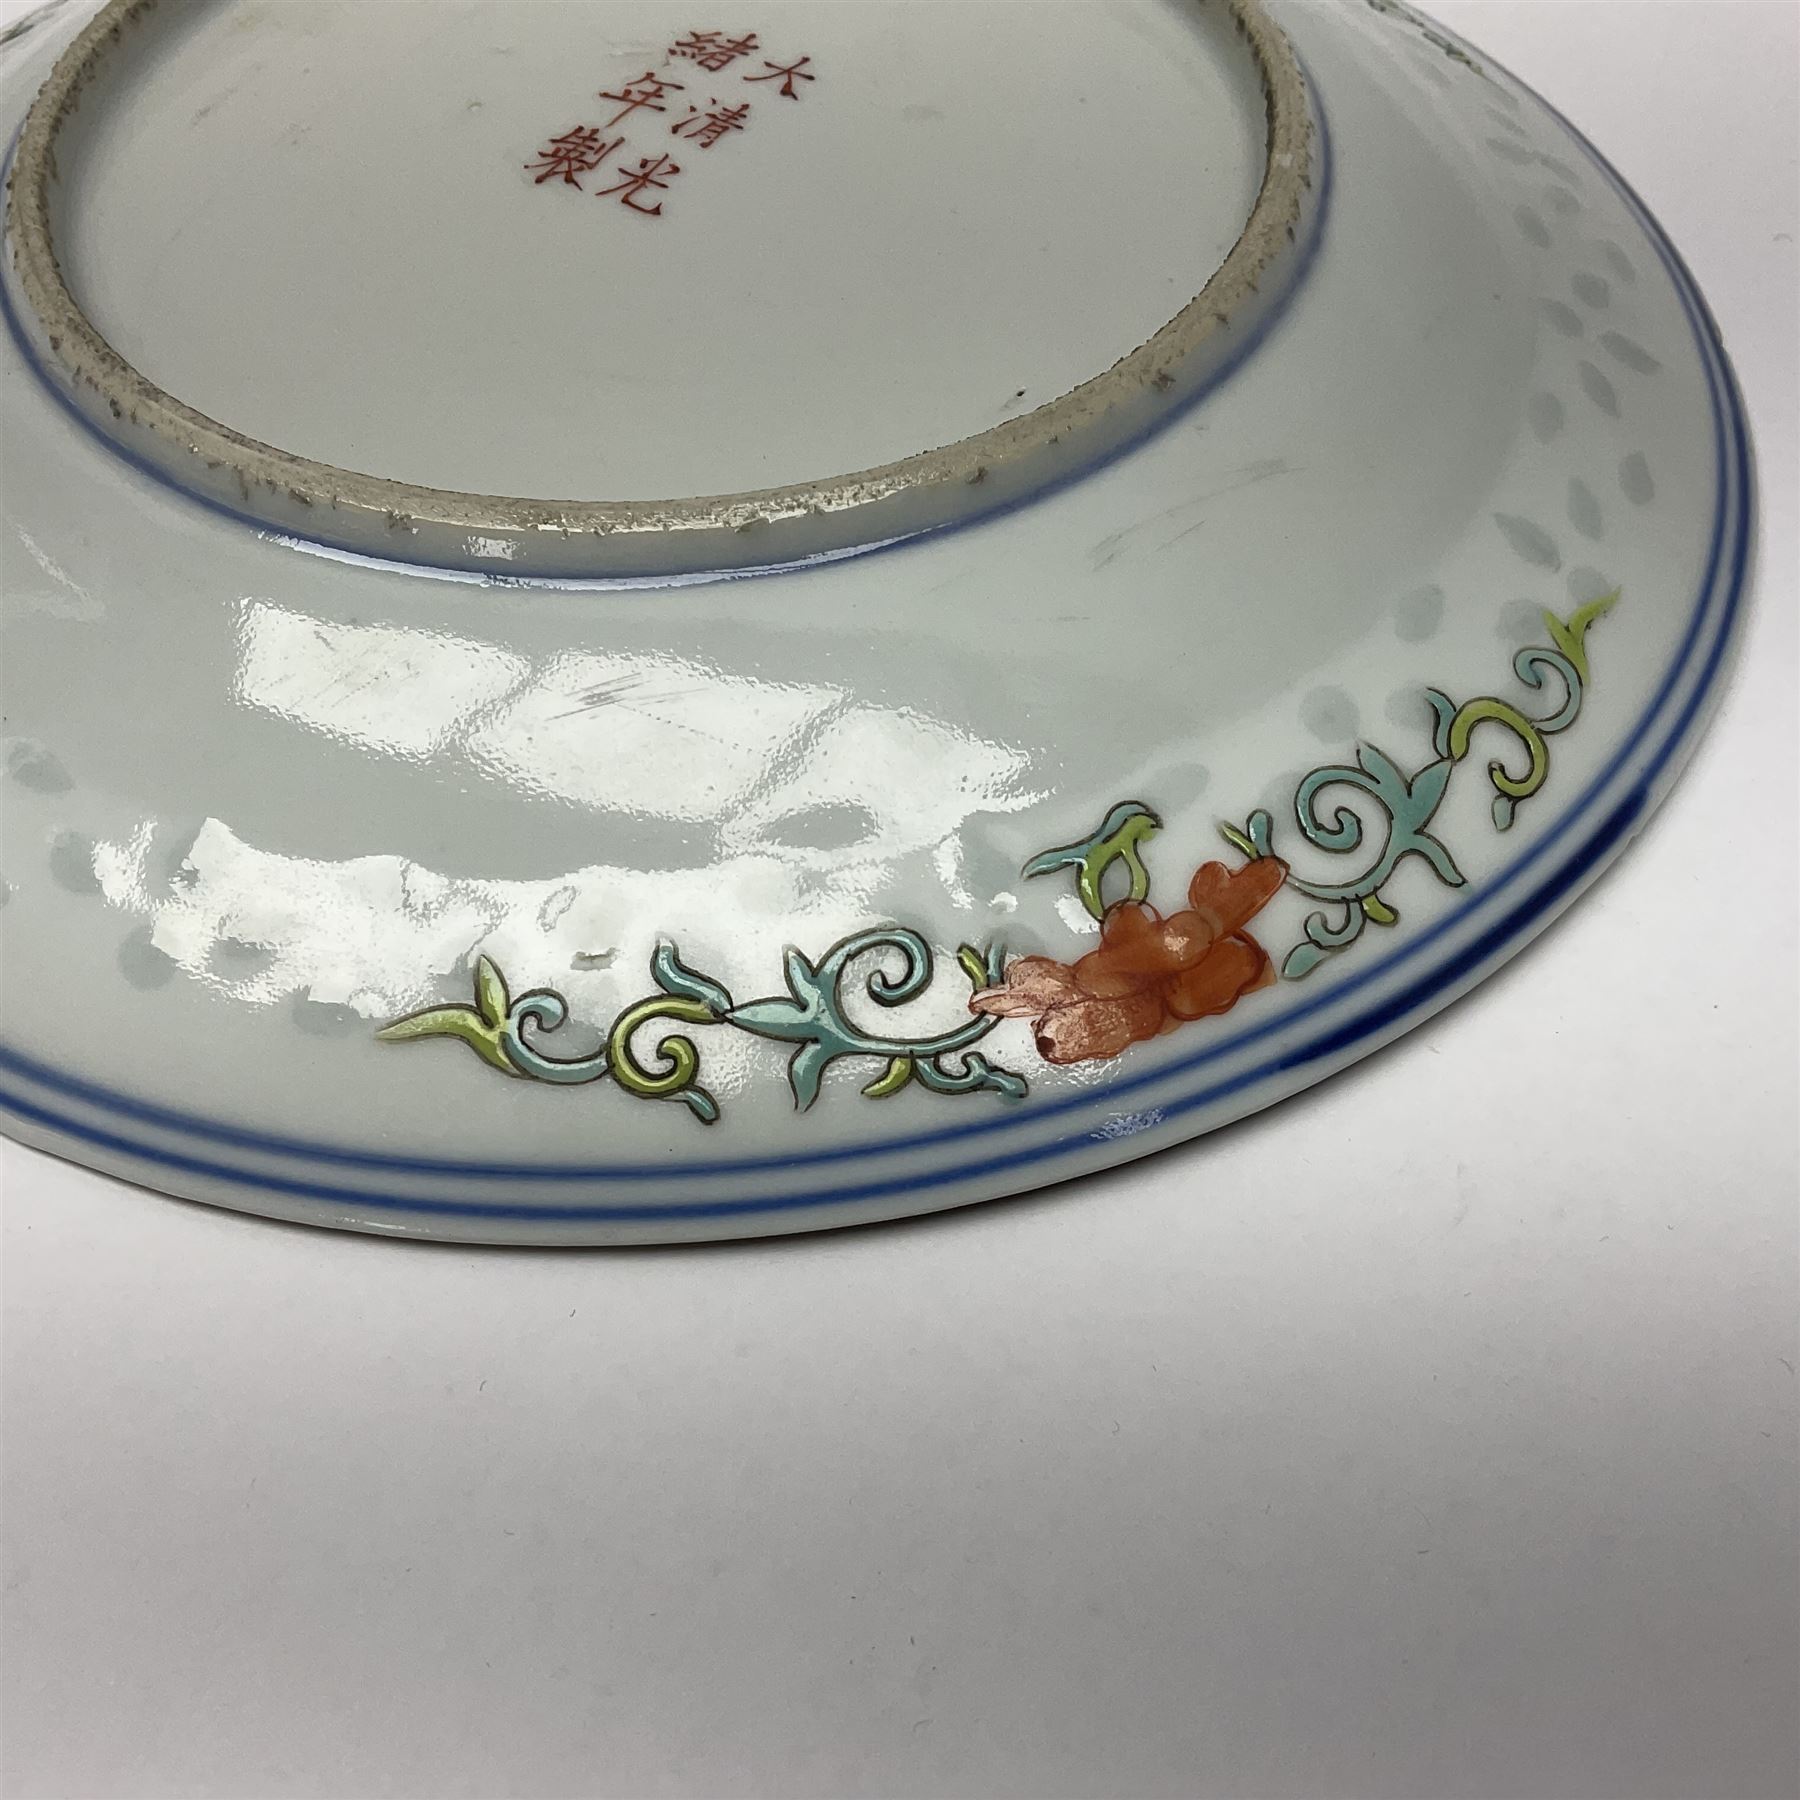 Late 19th century Chinese rice plate - Image 8 of 8